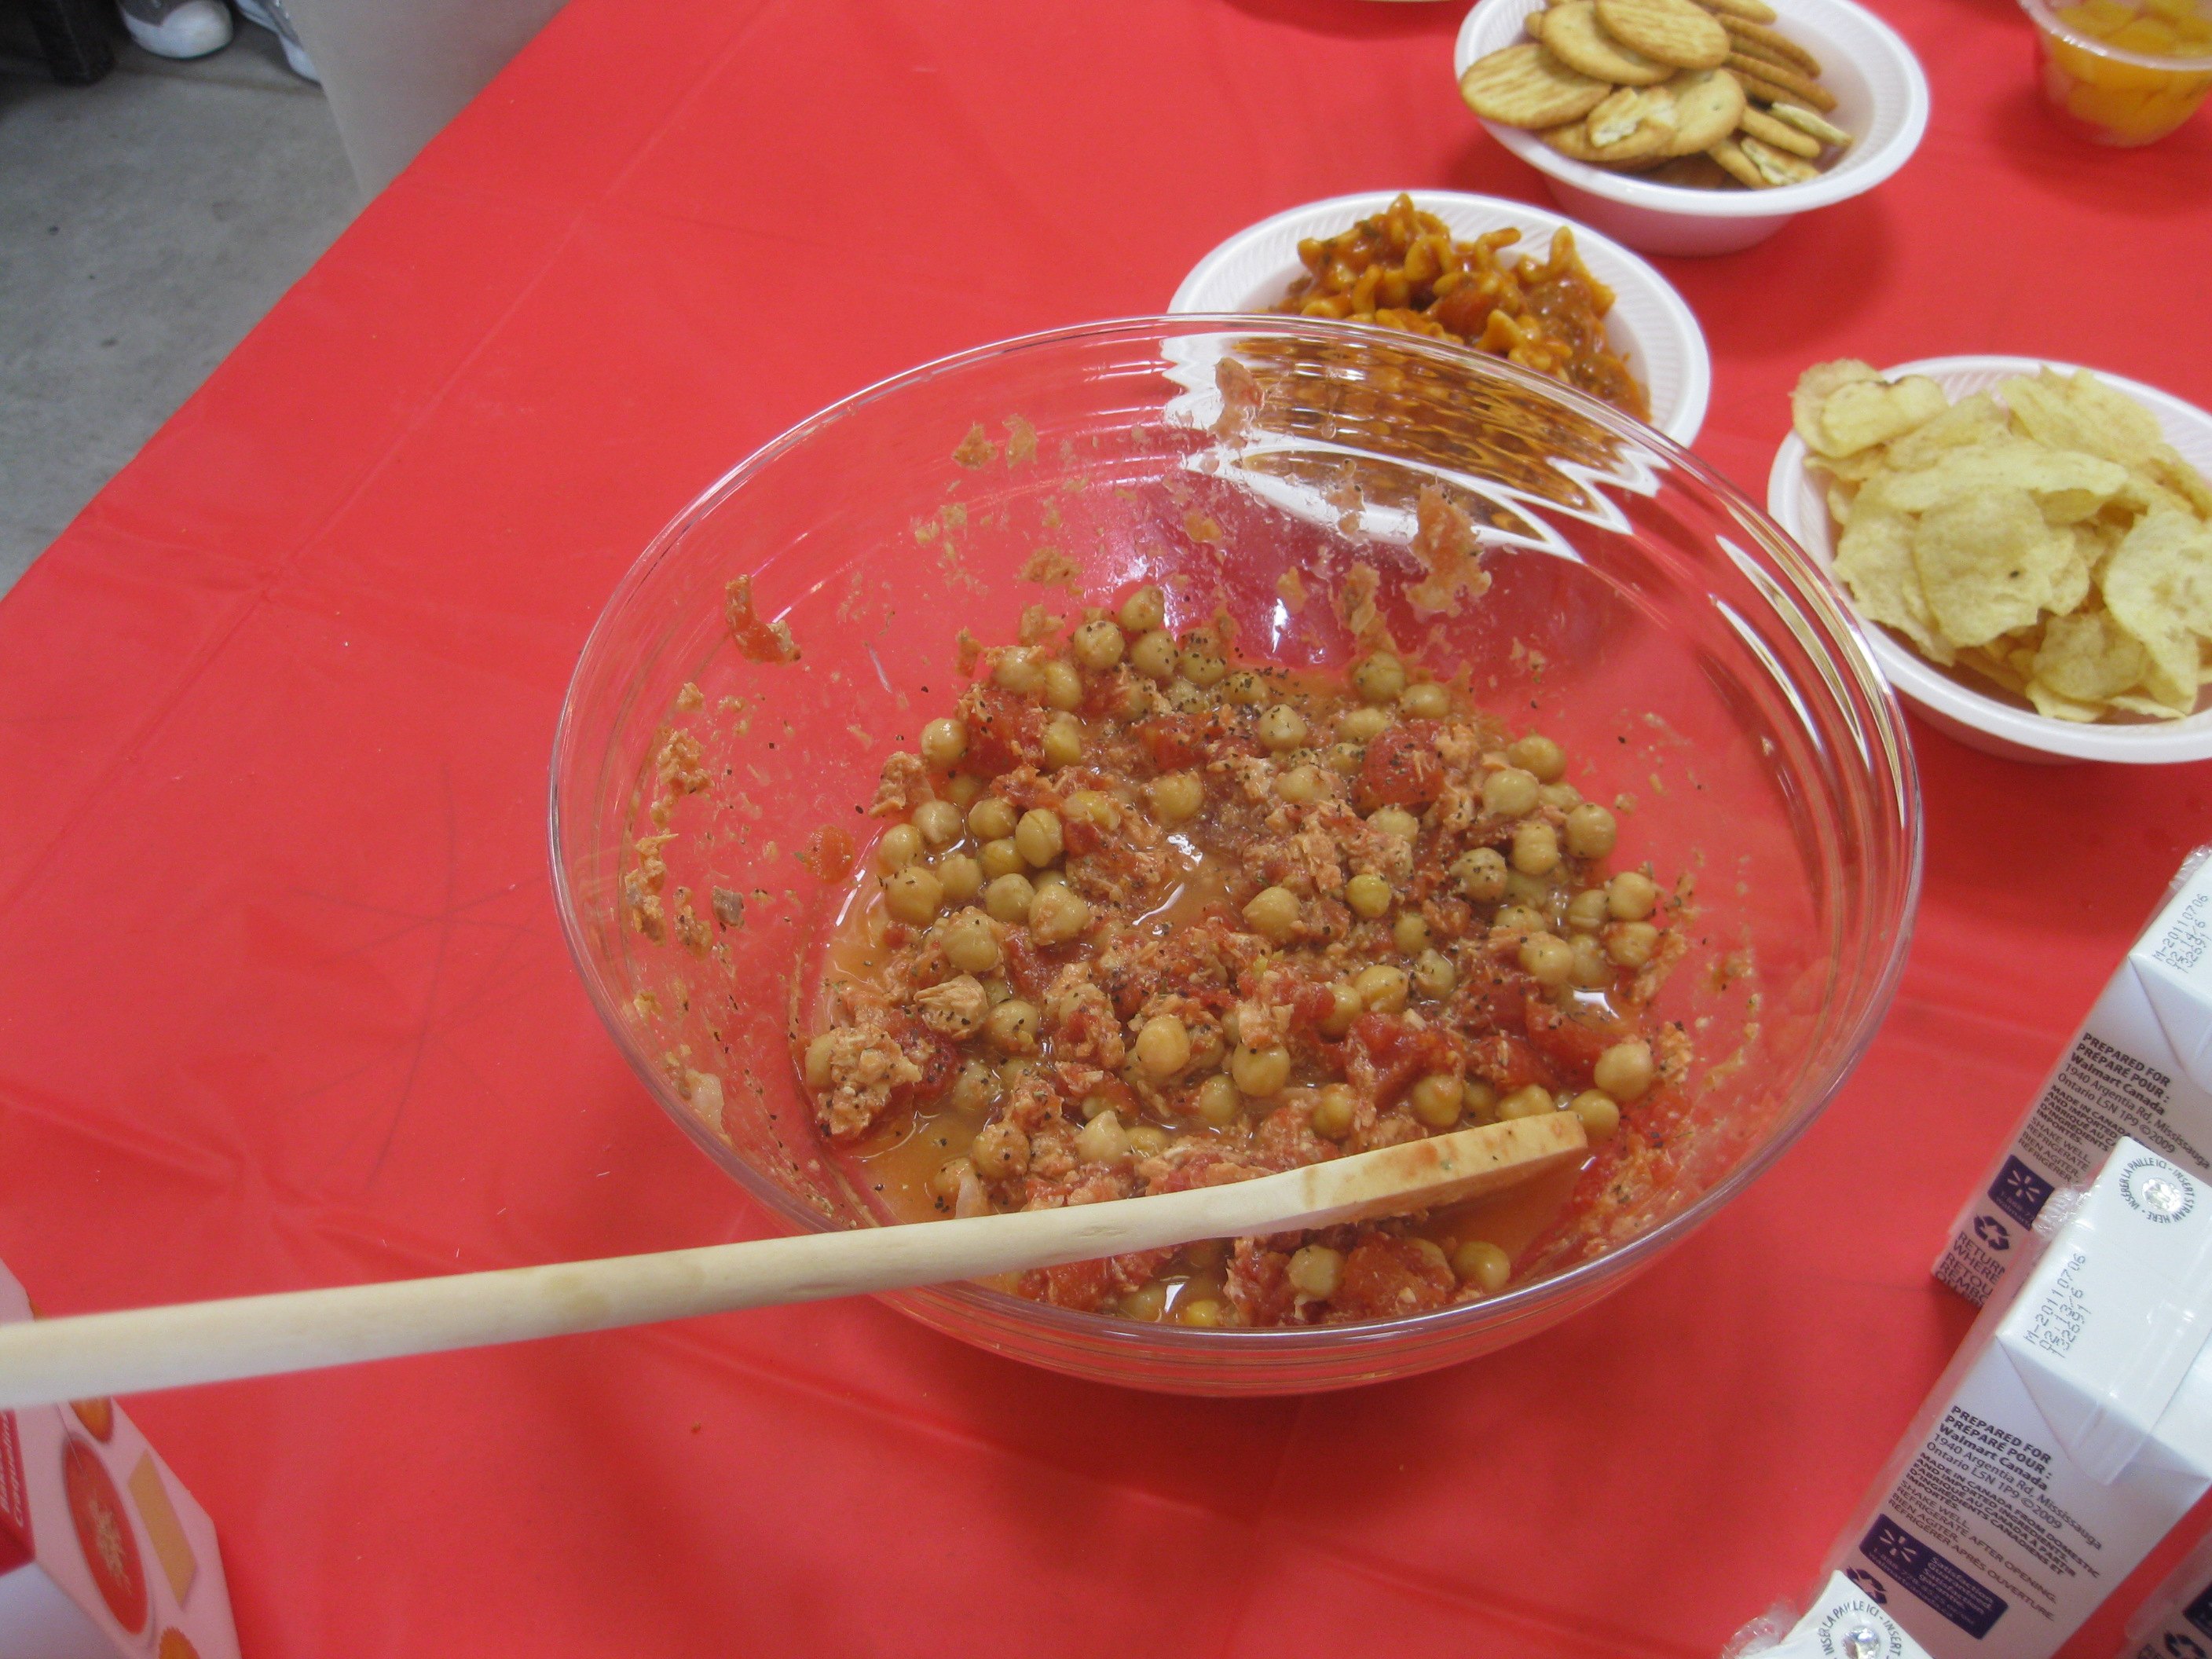 Golden Spoon winner made of tuna, chickpeas, salsa and spices